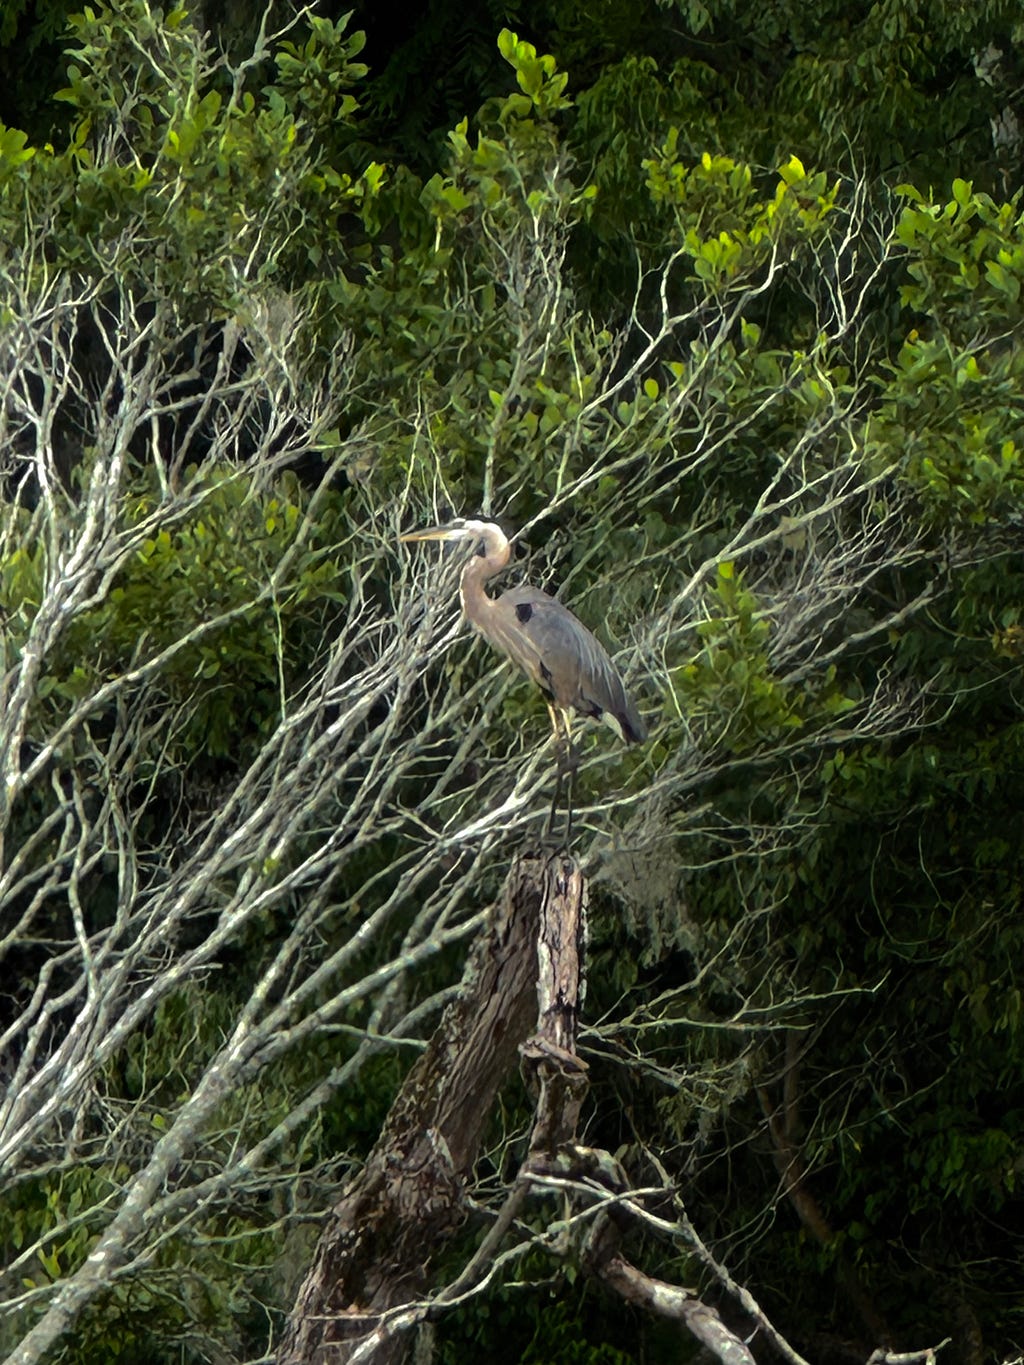 Large dark grey bird with a cured brown to white neck, long black legs and long beak standing on a dead tree. Bare tree branches and green leaves in the background.